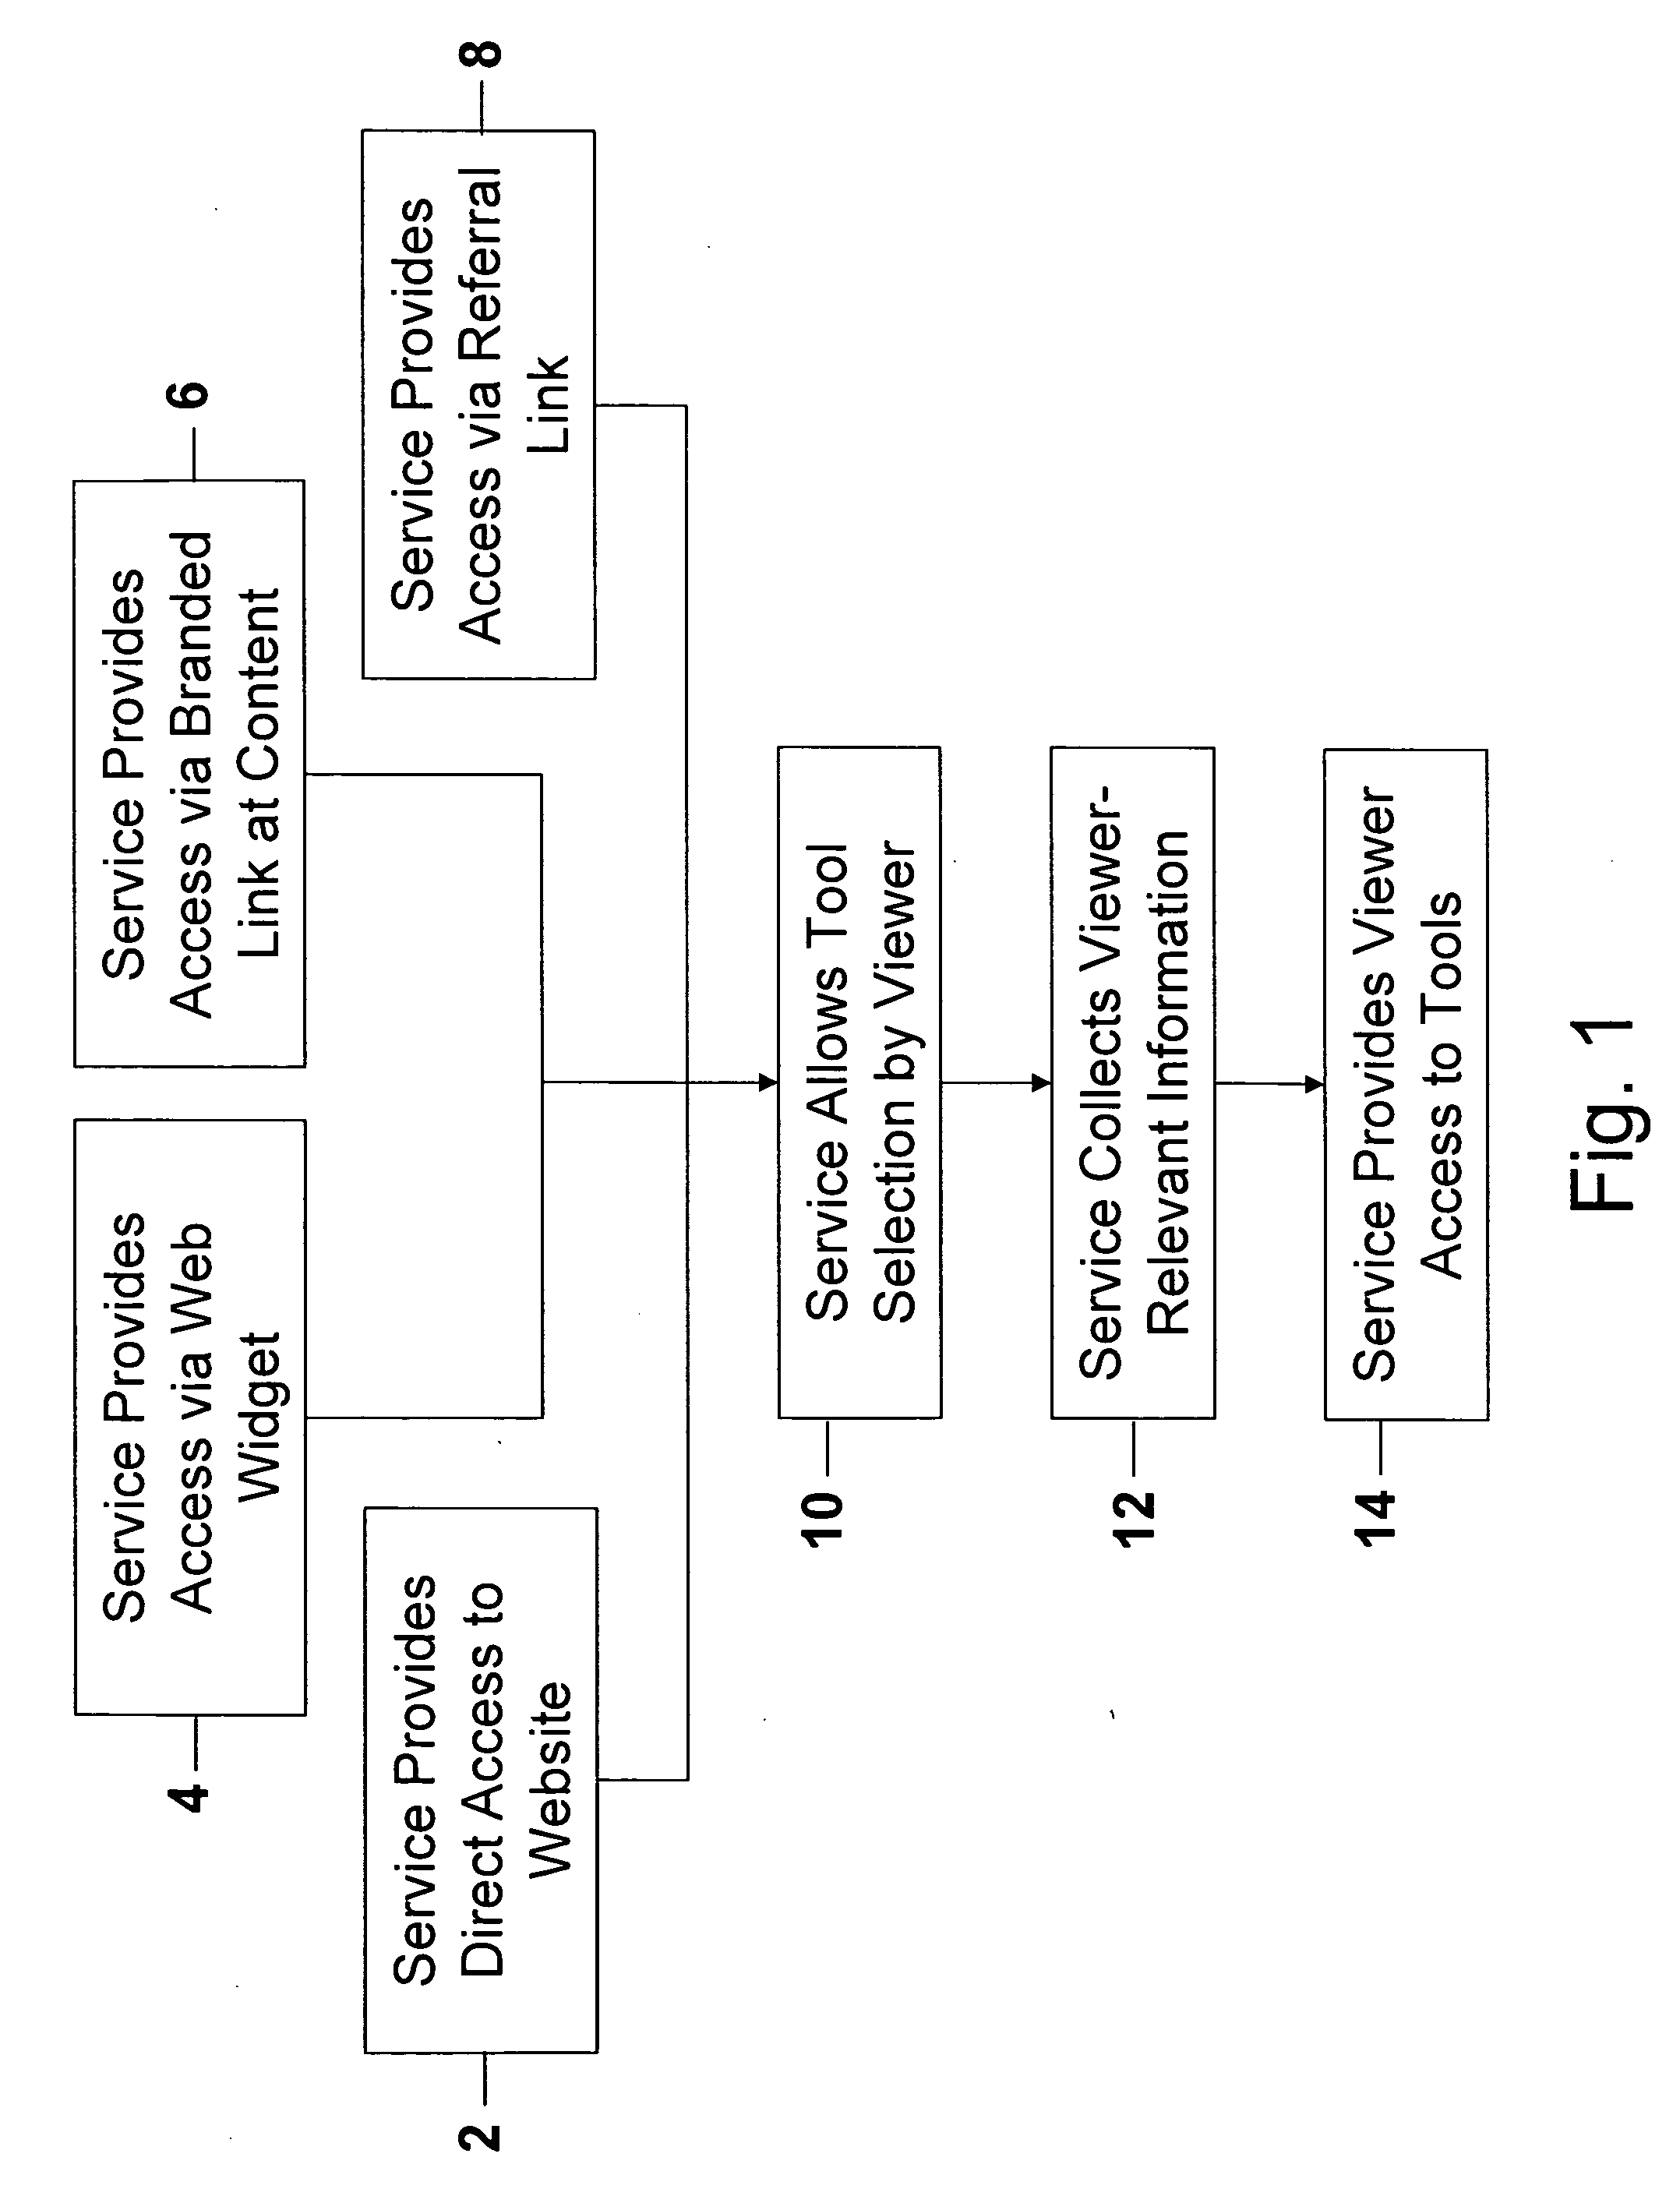 Dynamic information management system and method for content delivery and sharing in content-, metadata- & viewer-based, live social networking among users concurrently engaged in the same and/or similar content